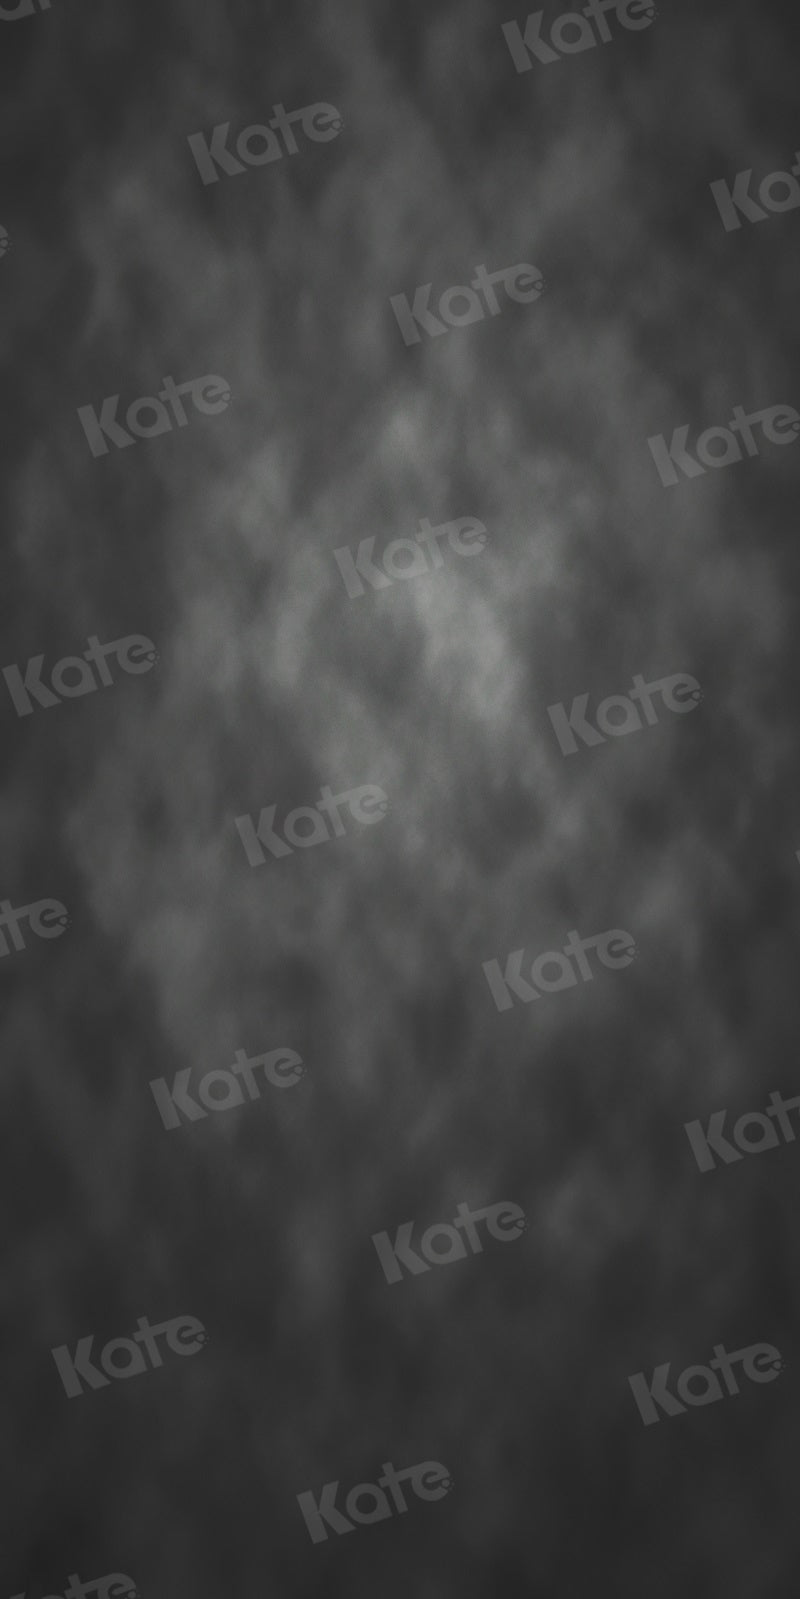 Kate Black Abstract Texture Backdrop for Photography